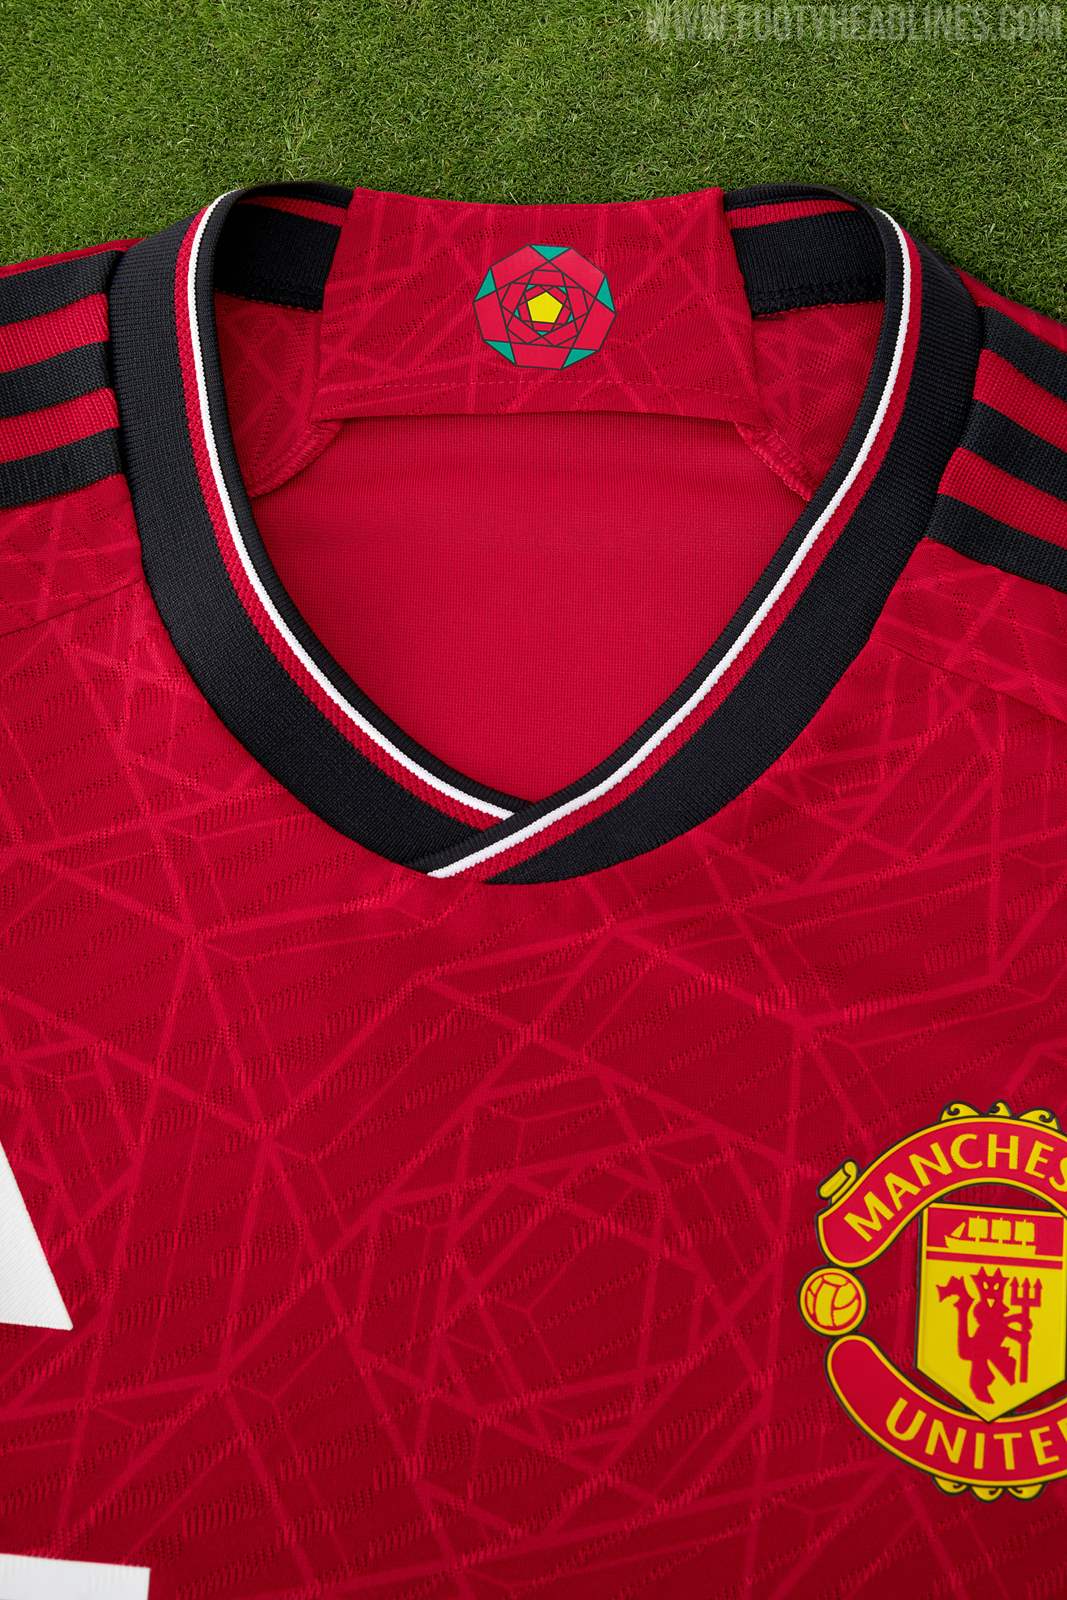 Manchester United 23-24 Away Kit Released - Footy Headlines